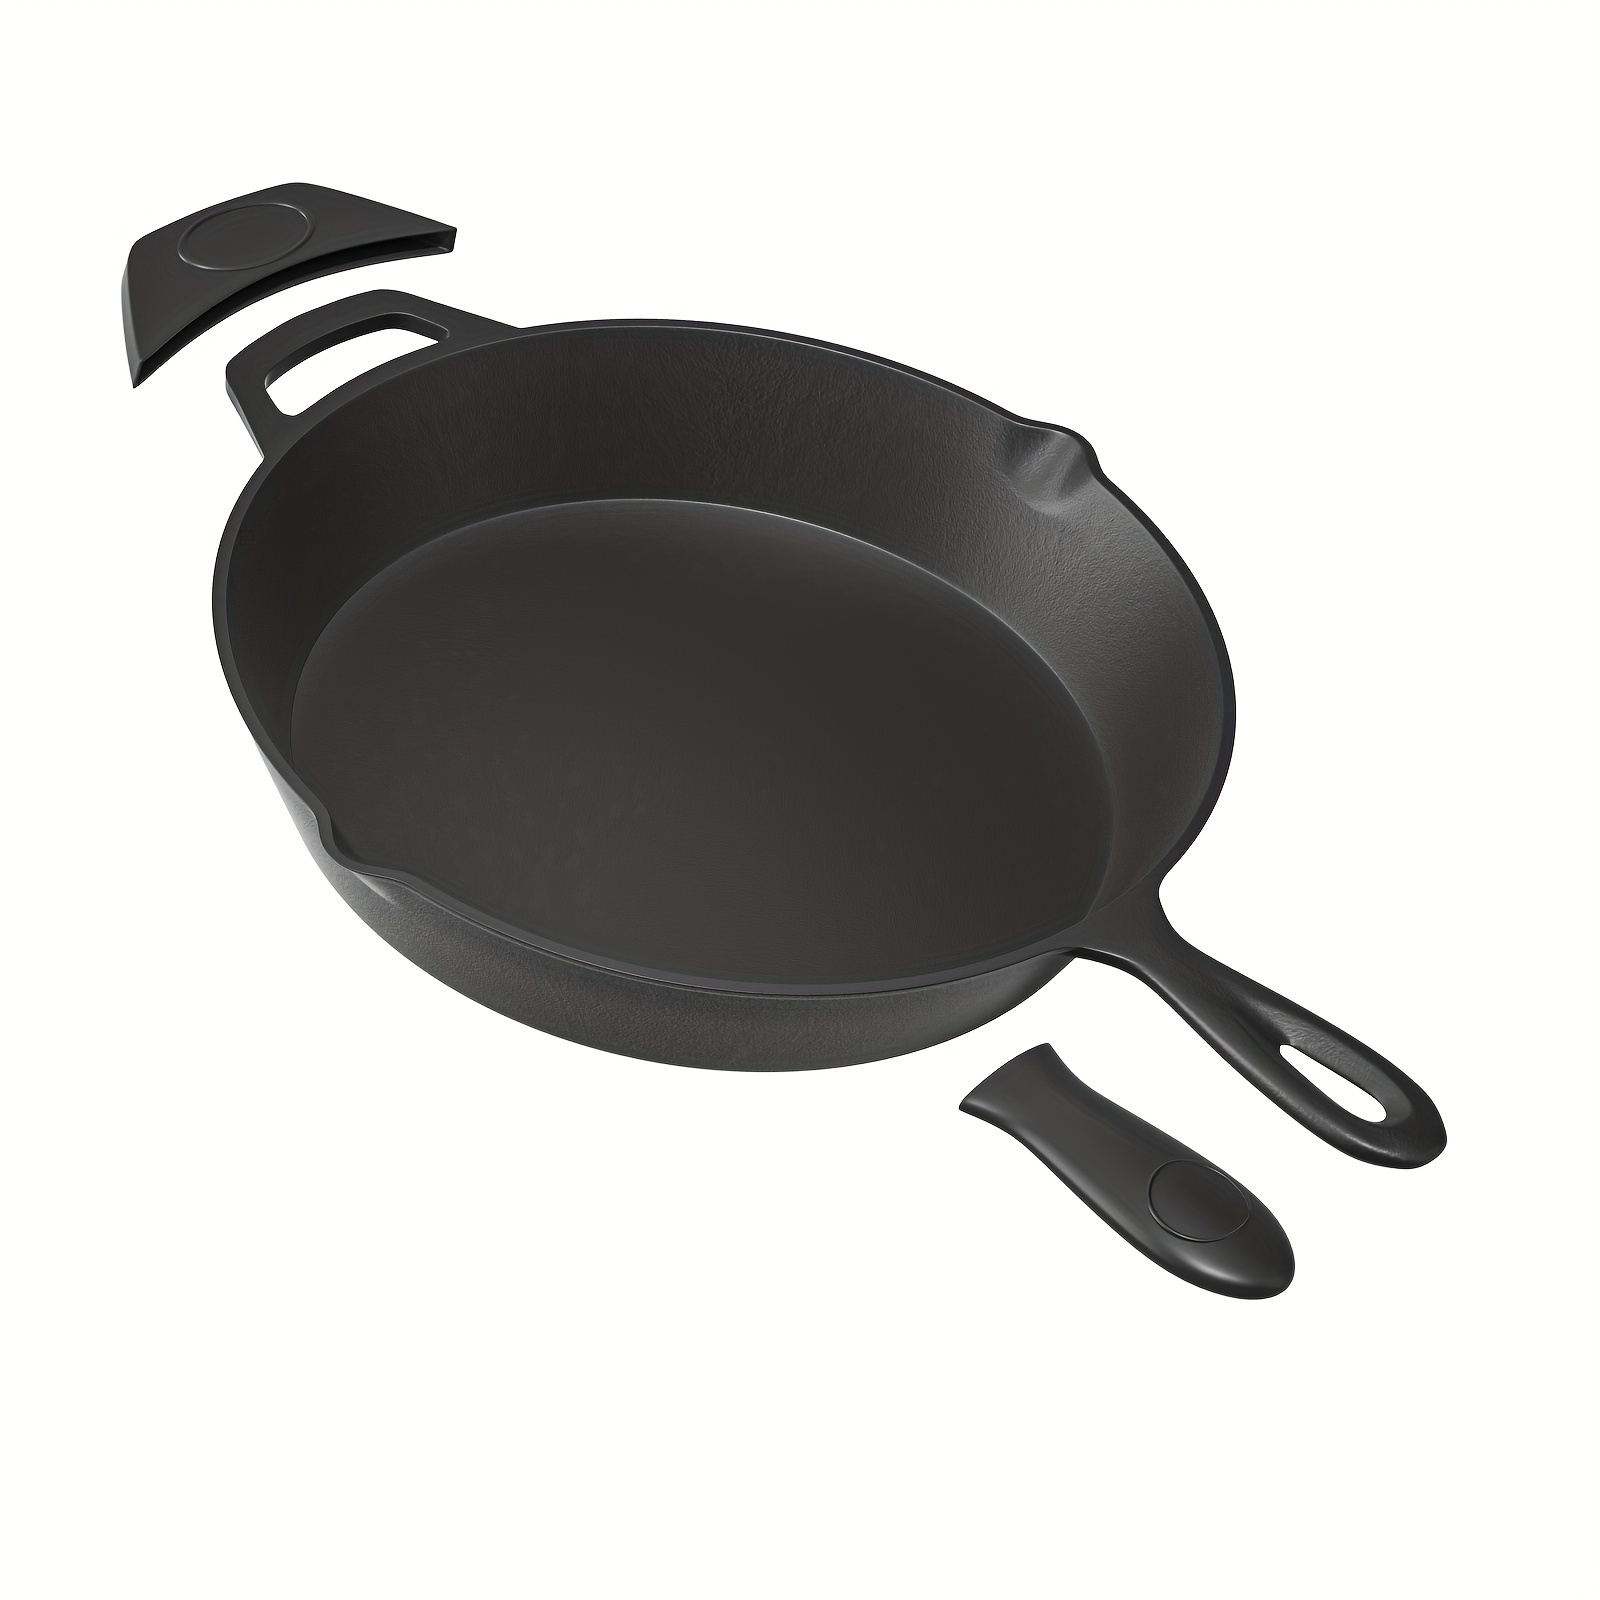 Cast Iron Skillet - 8-Inch Frying Pan with Pour Spouts + Silicone